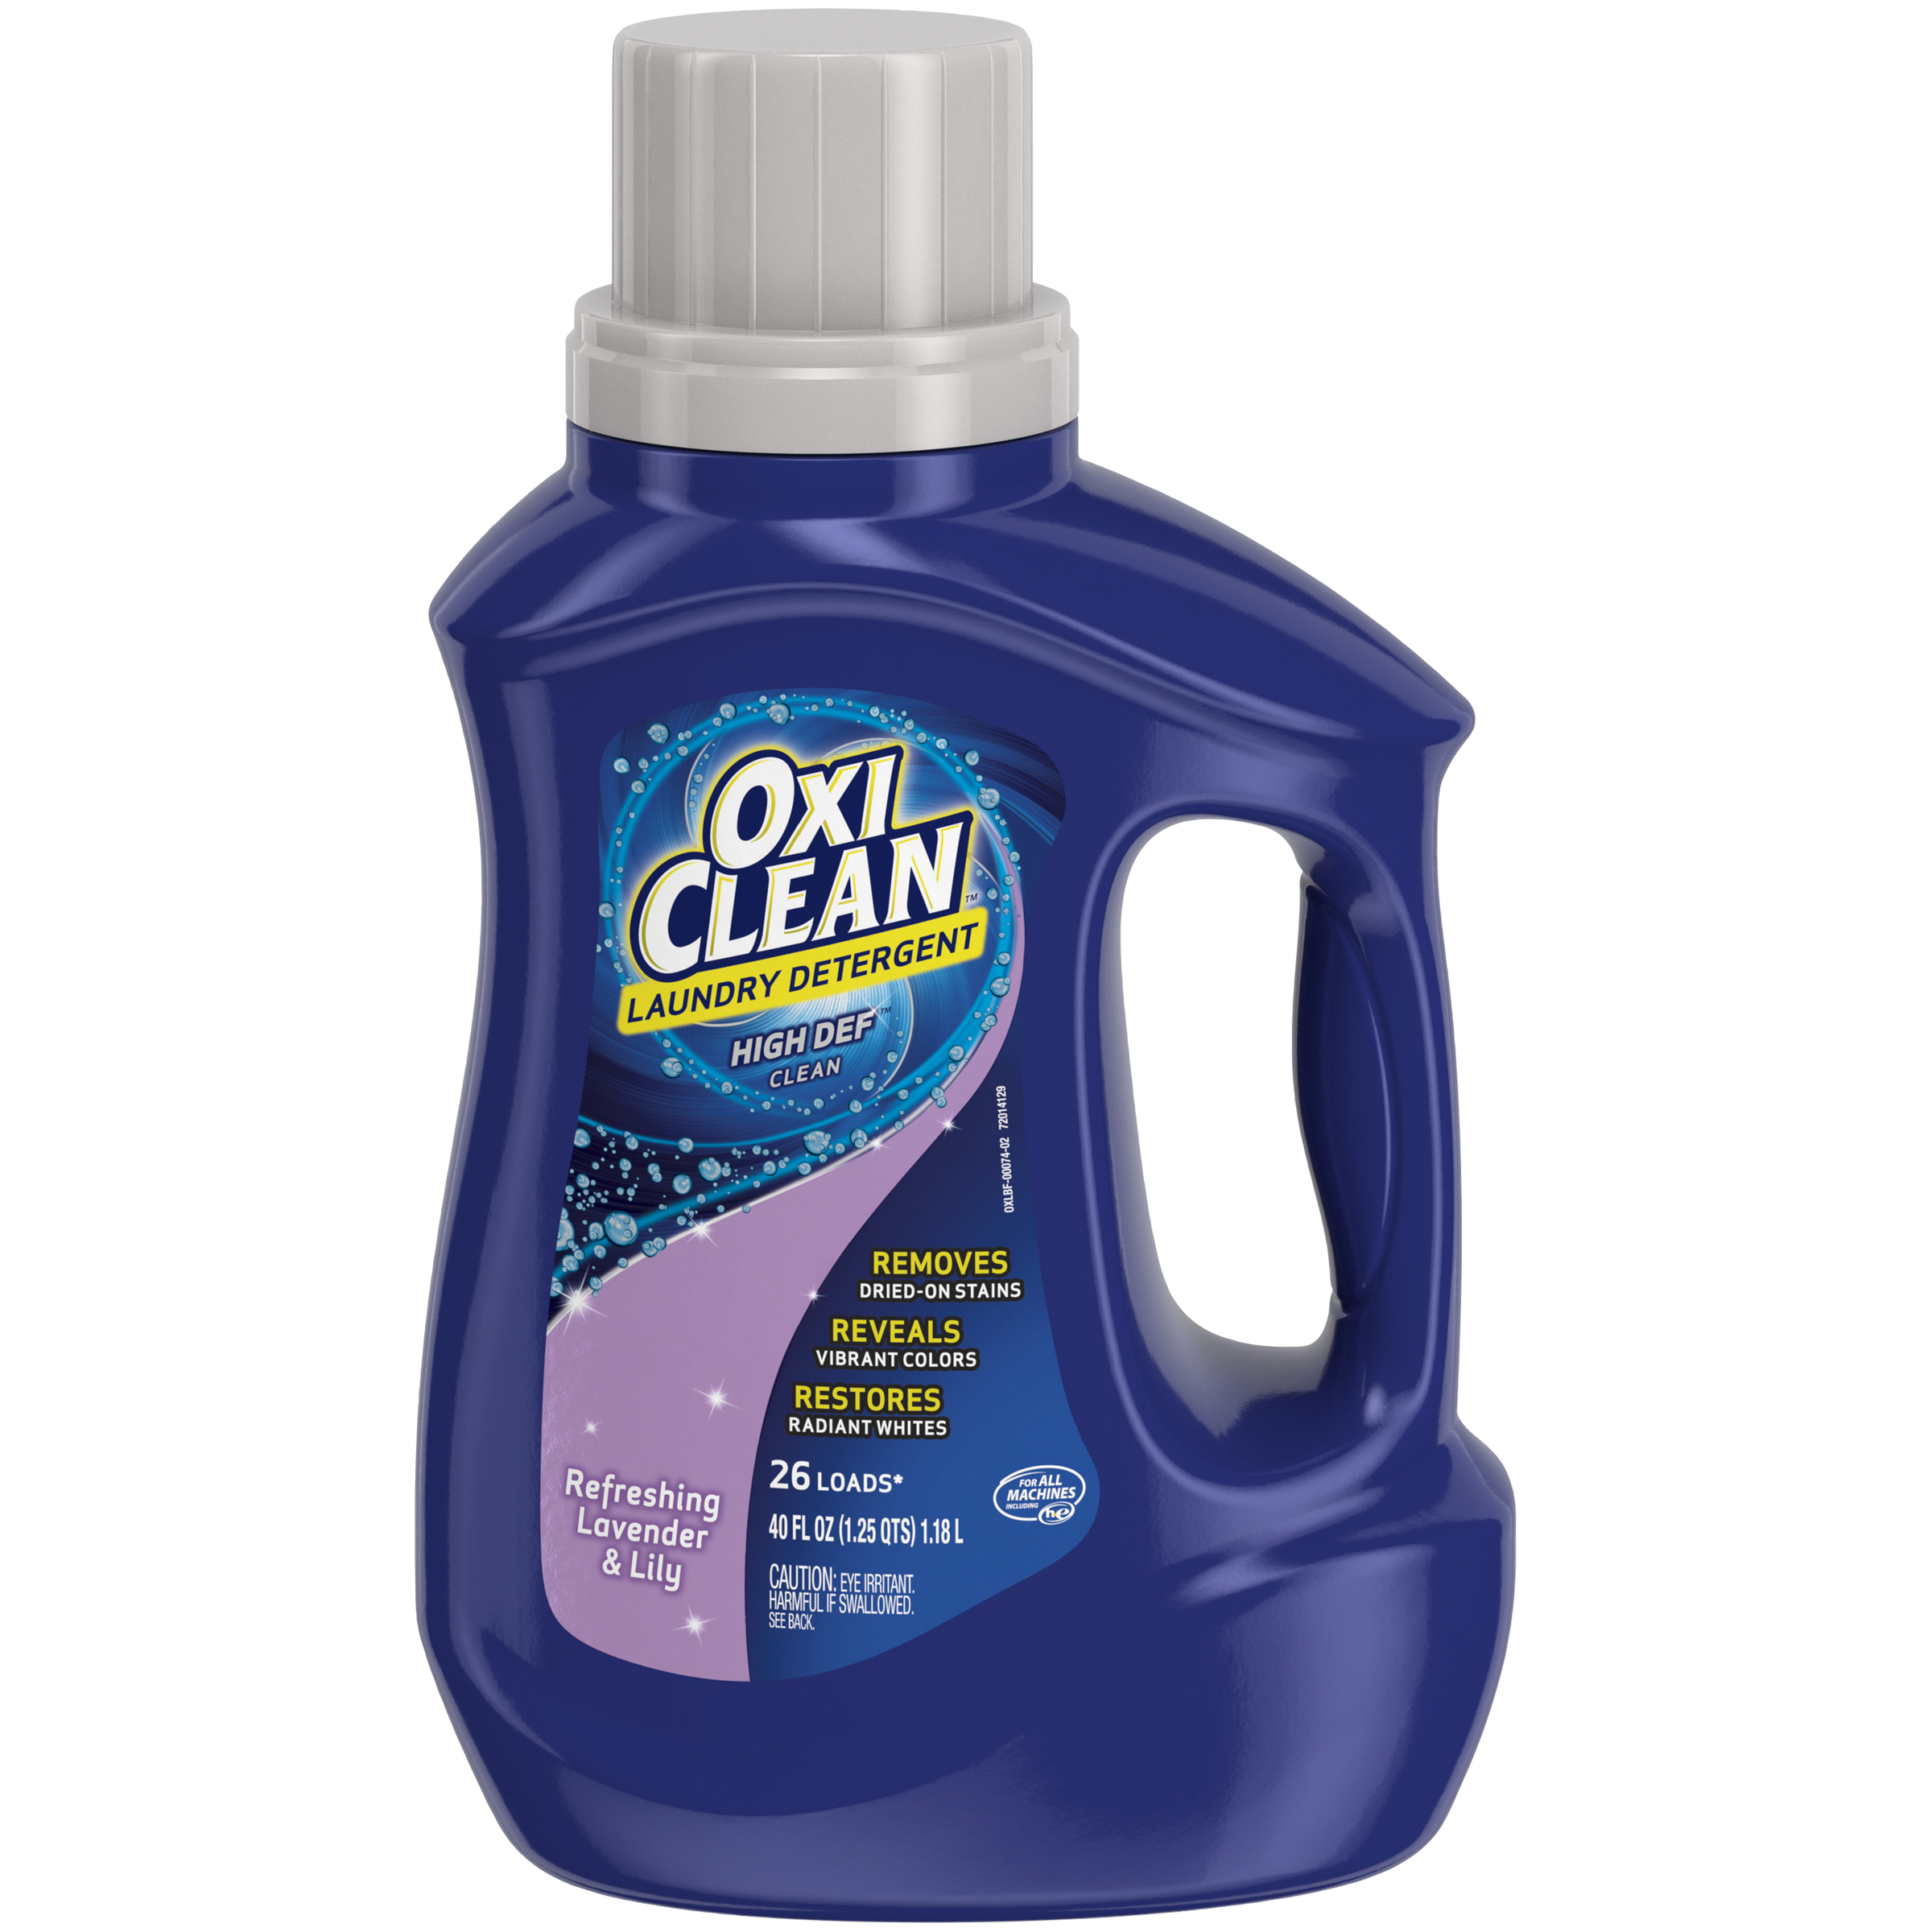 Stain and Odor Removing Products